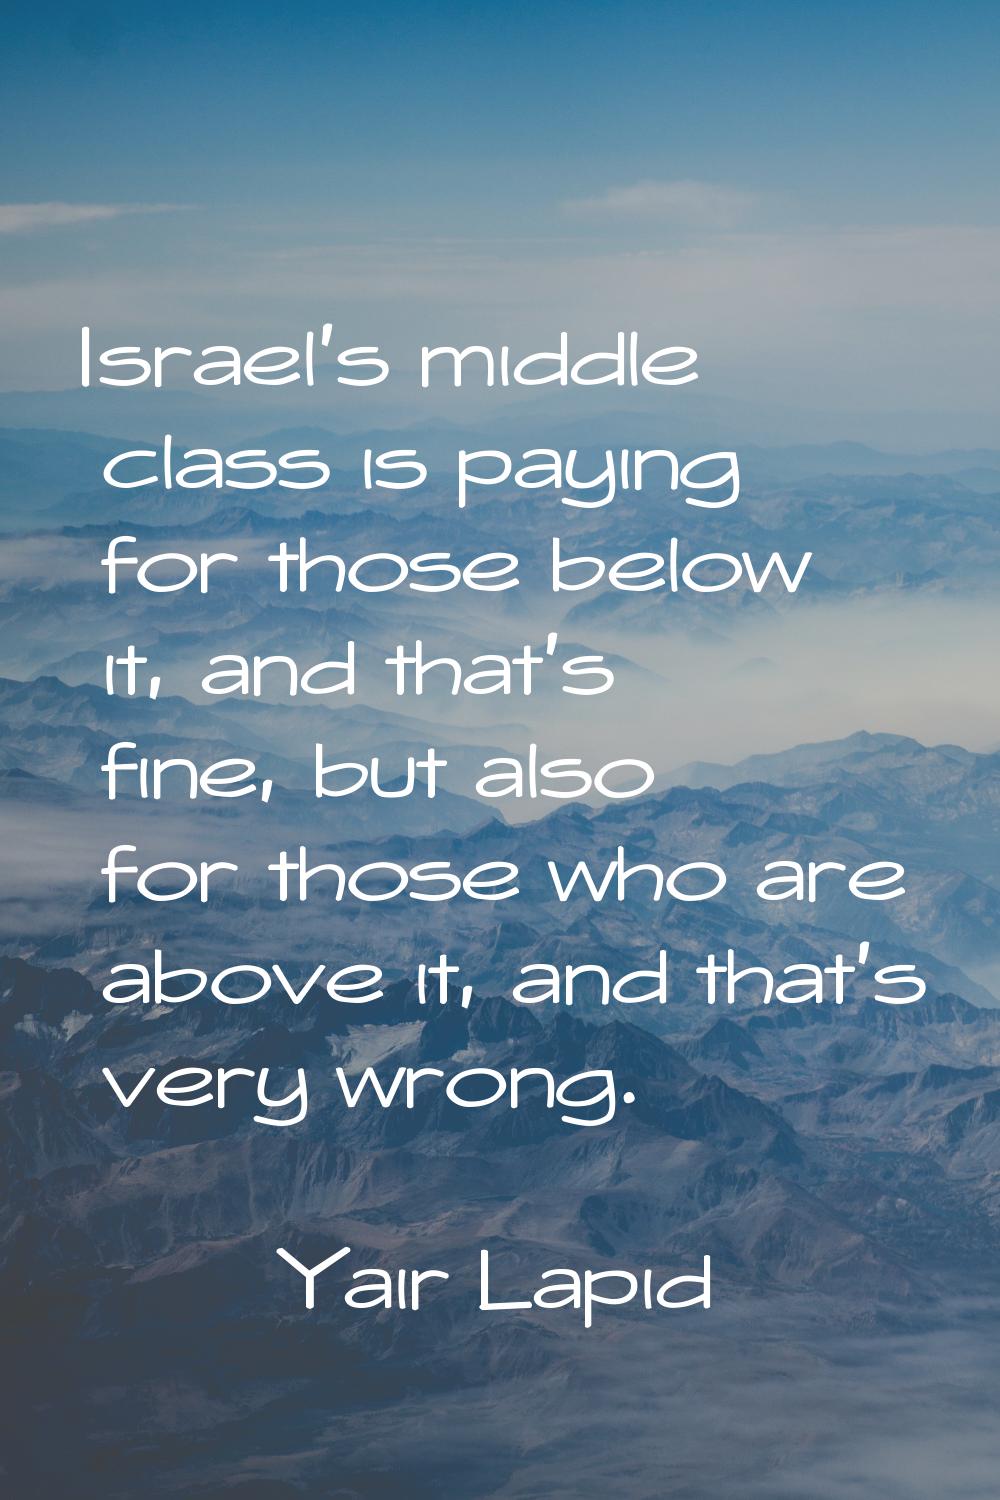 Israel's middle class is paying for those below it, and that's fine, but also for those who are abo